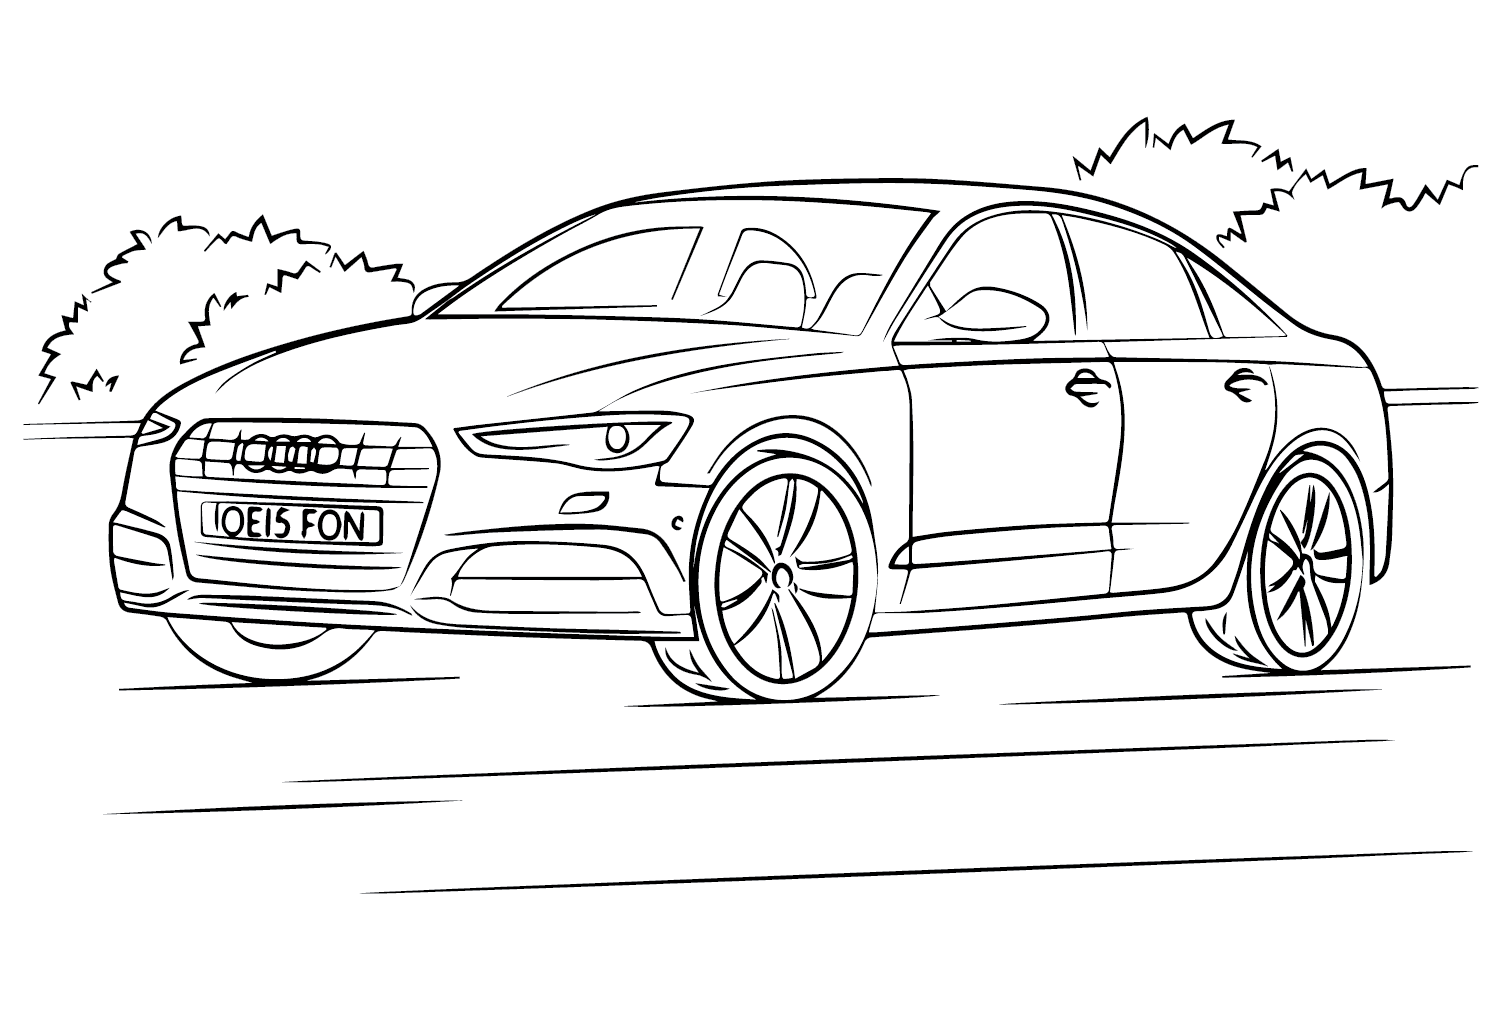 Audi A6 Coloring Page to Print - Free Printable Coloring Pages